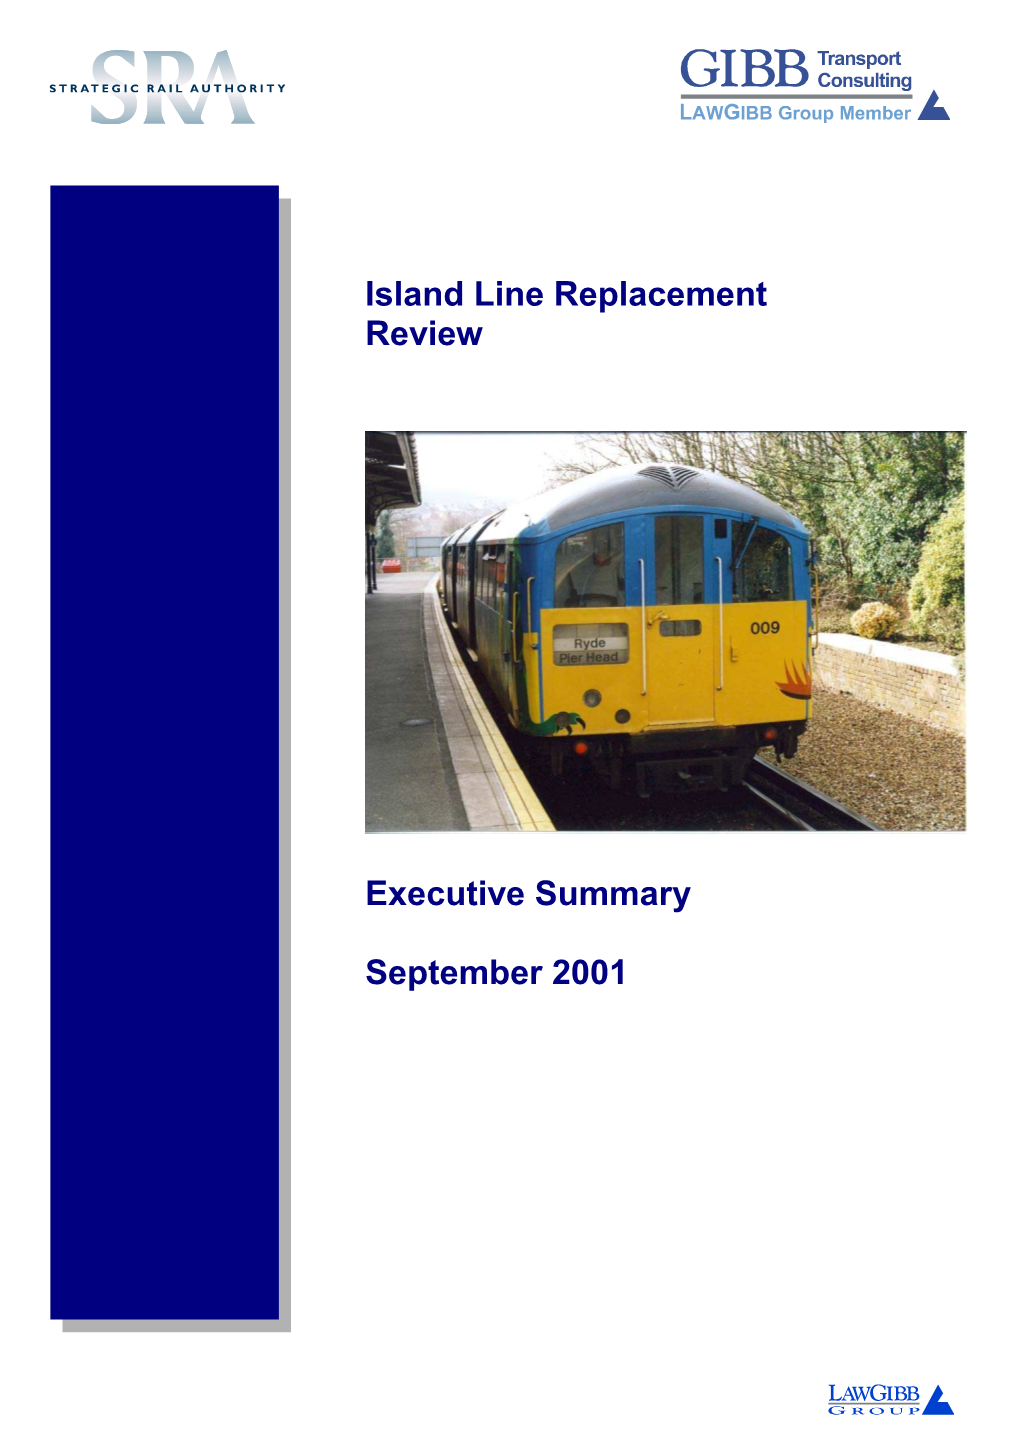 Island Line Replacement Report